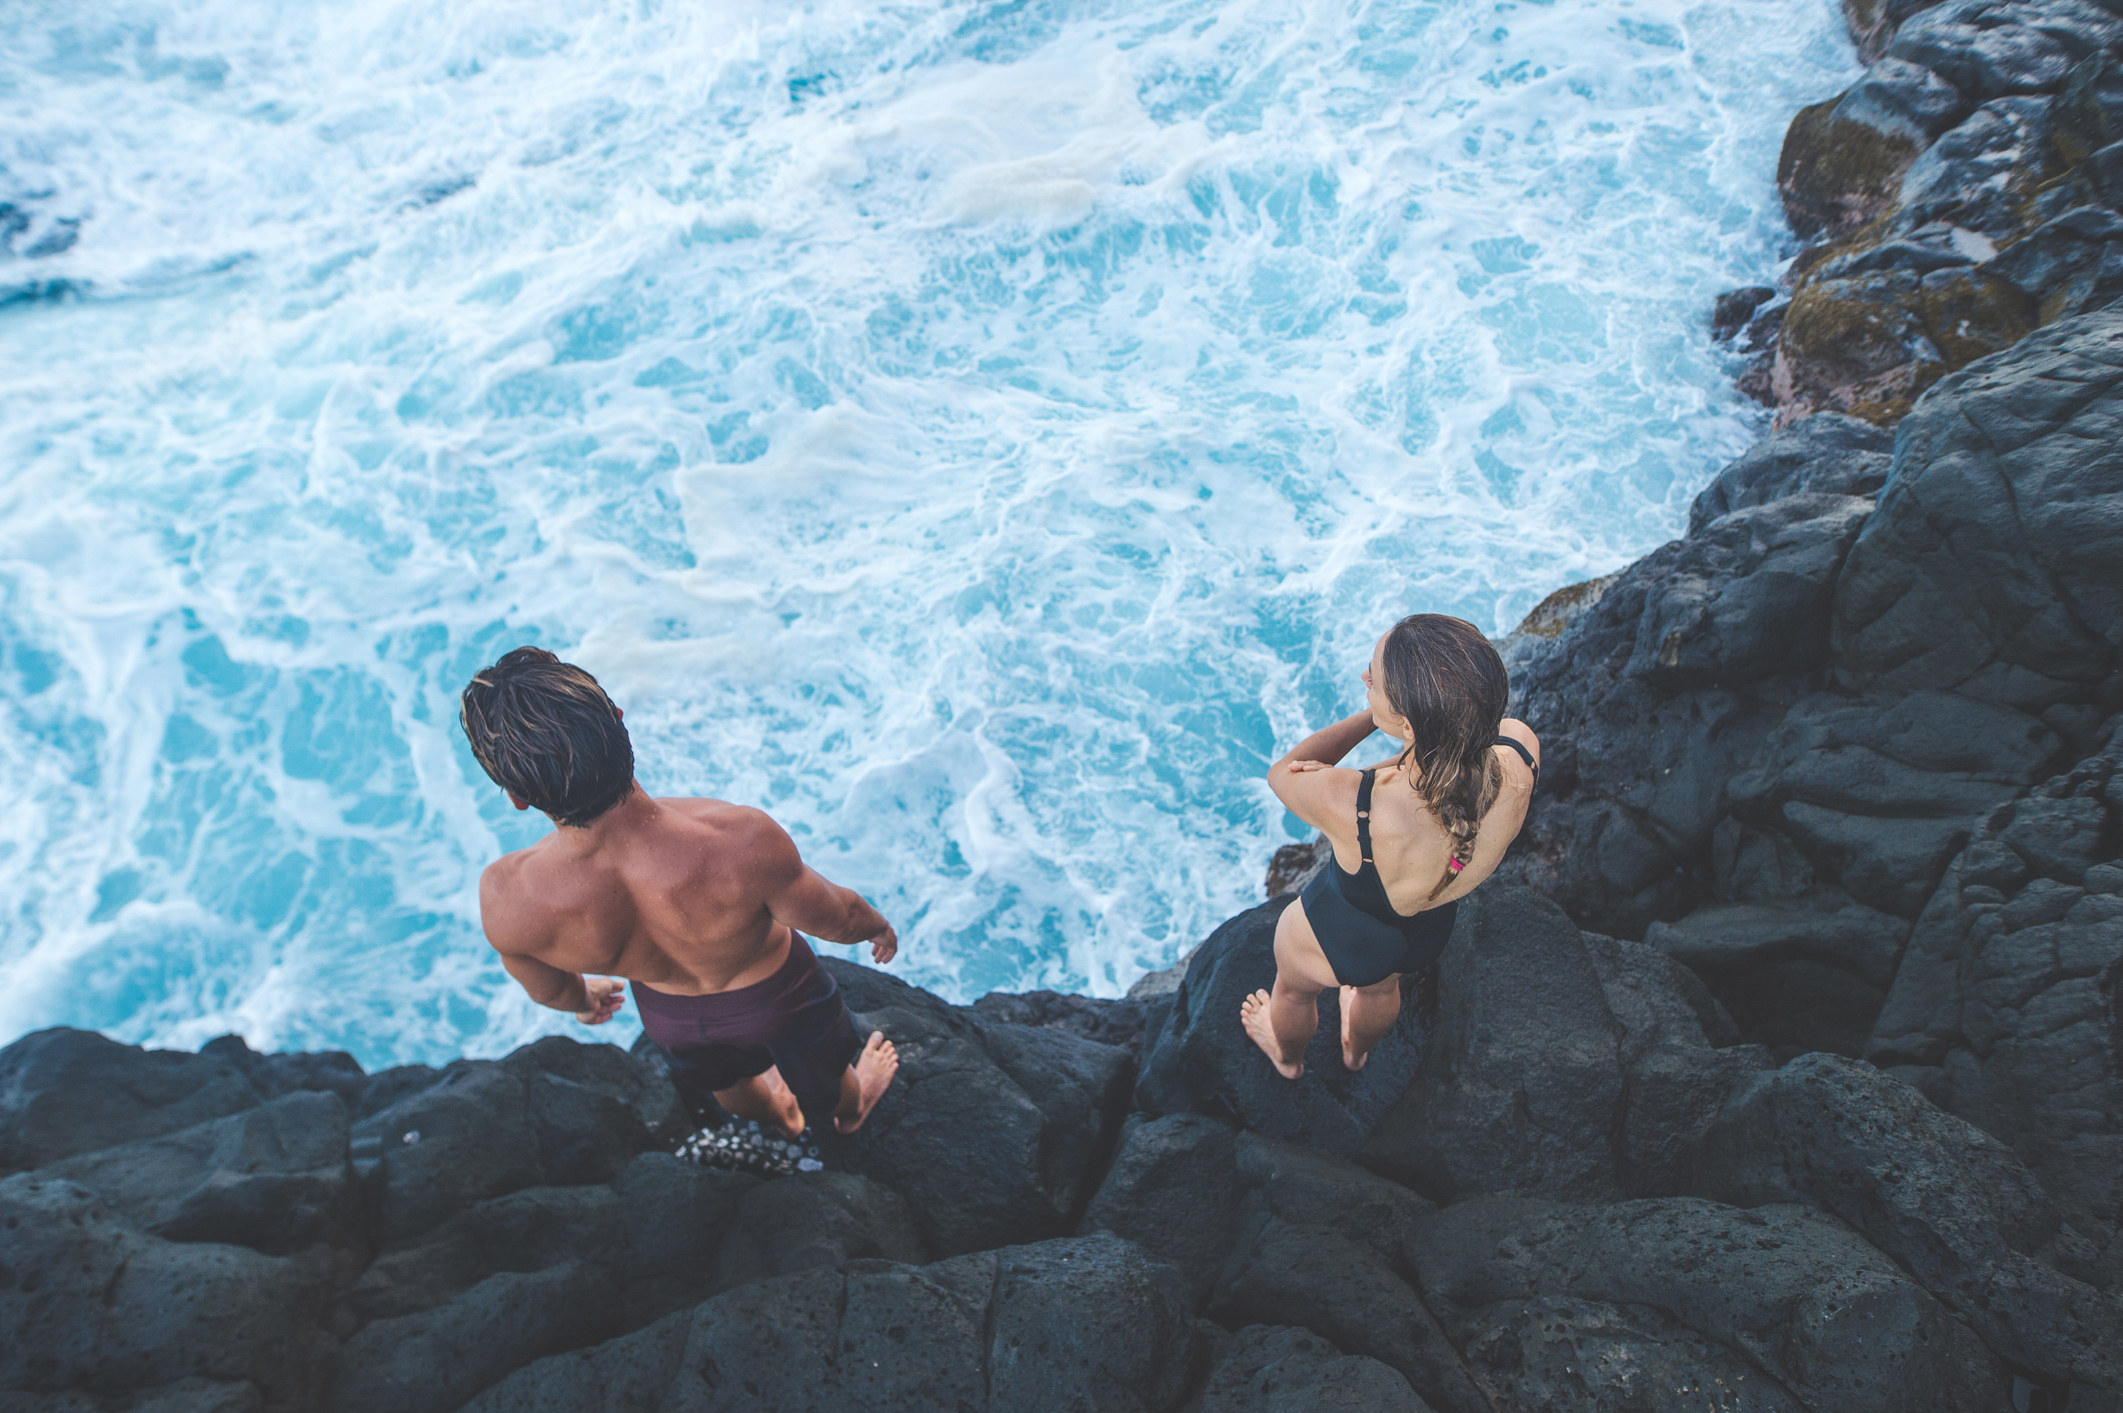 Two people in bathing suits standing on a cliff looking at the water below